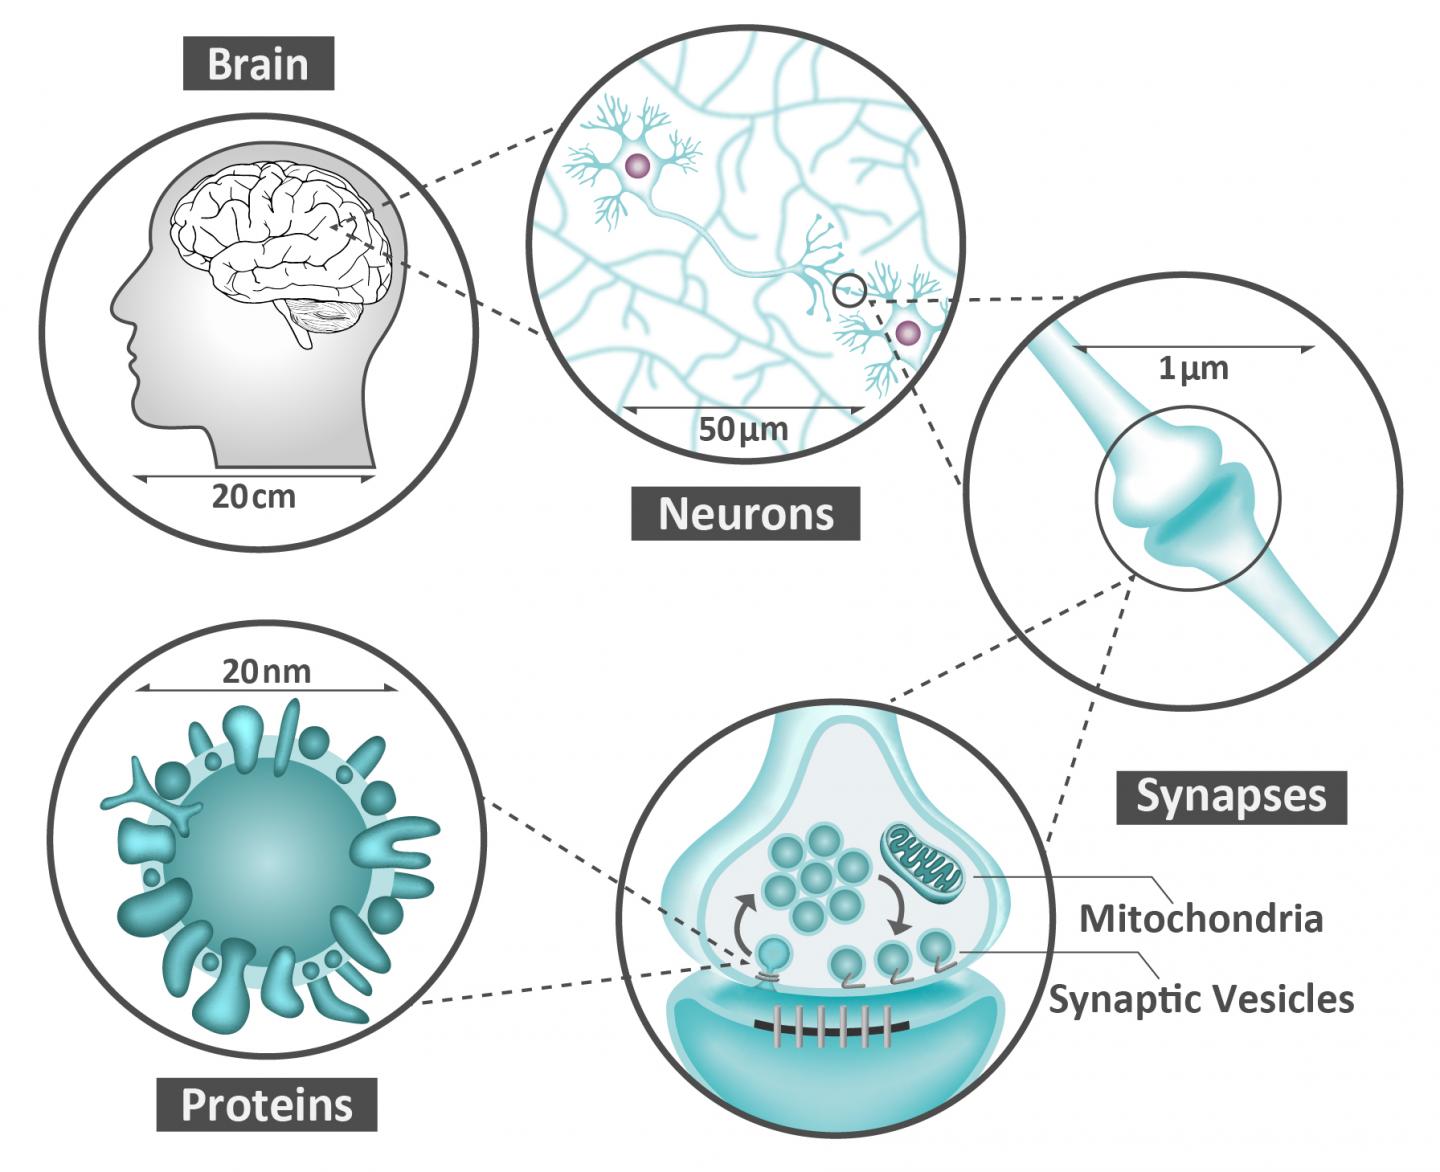 Neurons, synapses and proteins